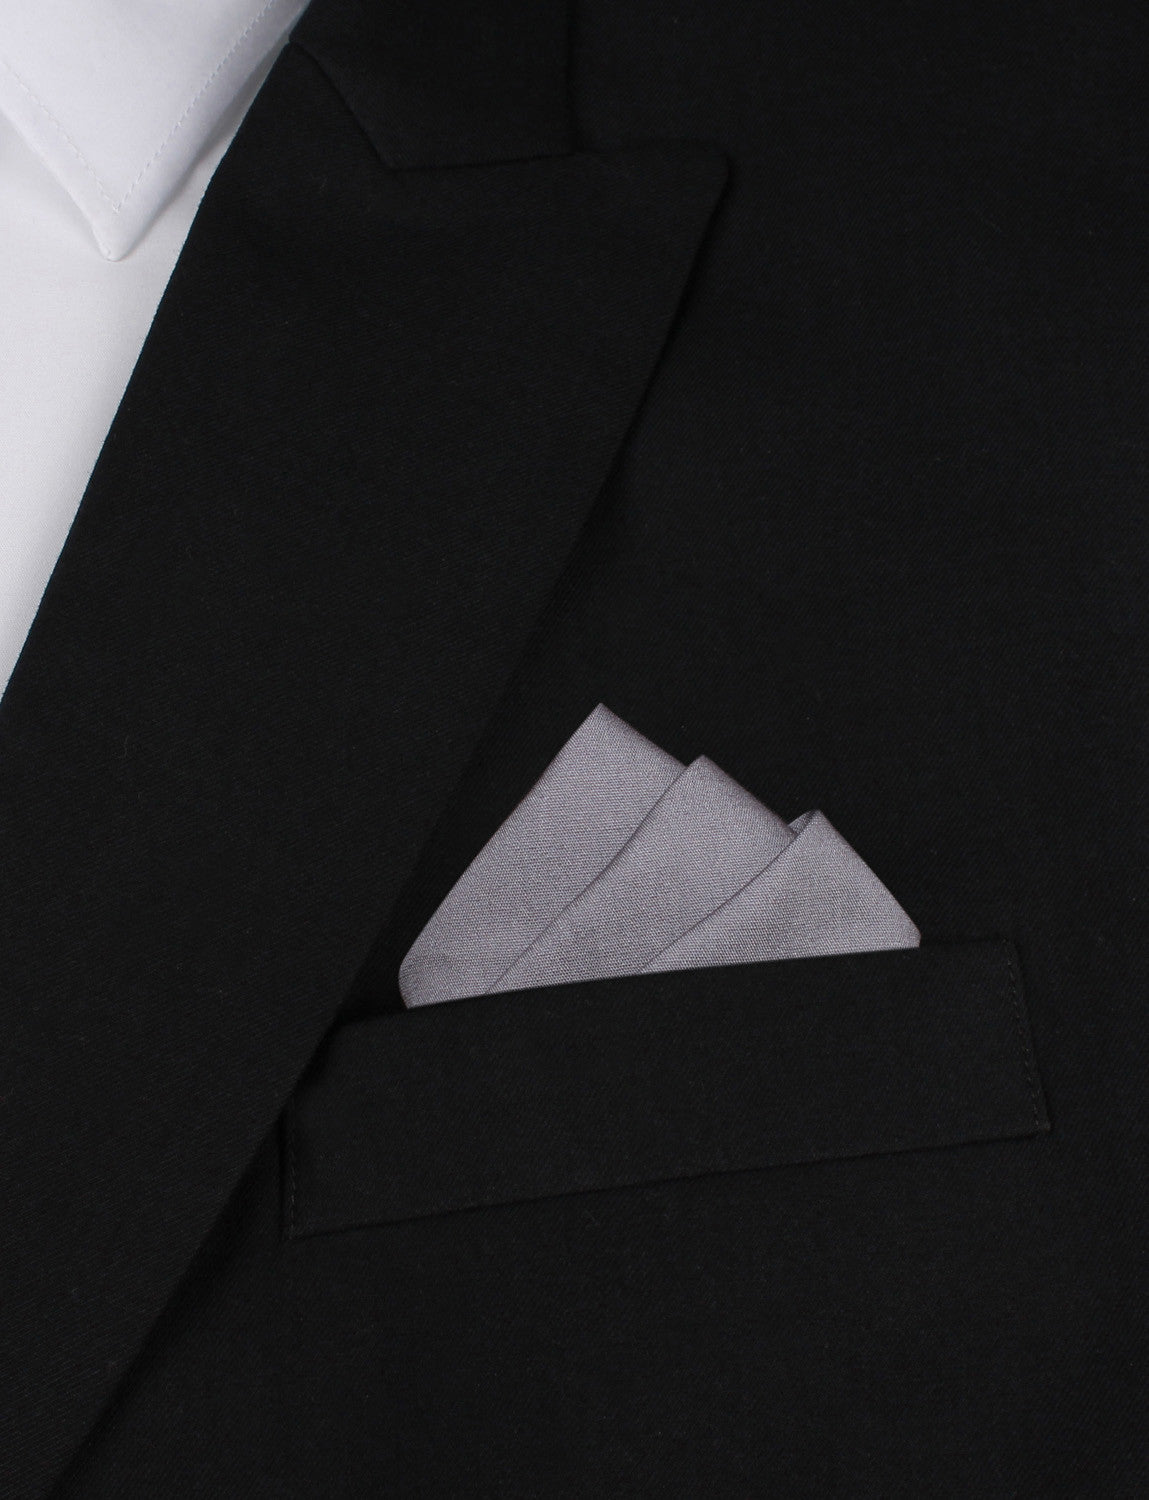 Charcoal Grey Cotton Oxygen Three Point Pocket Square Fold